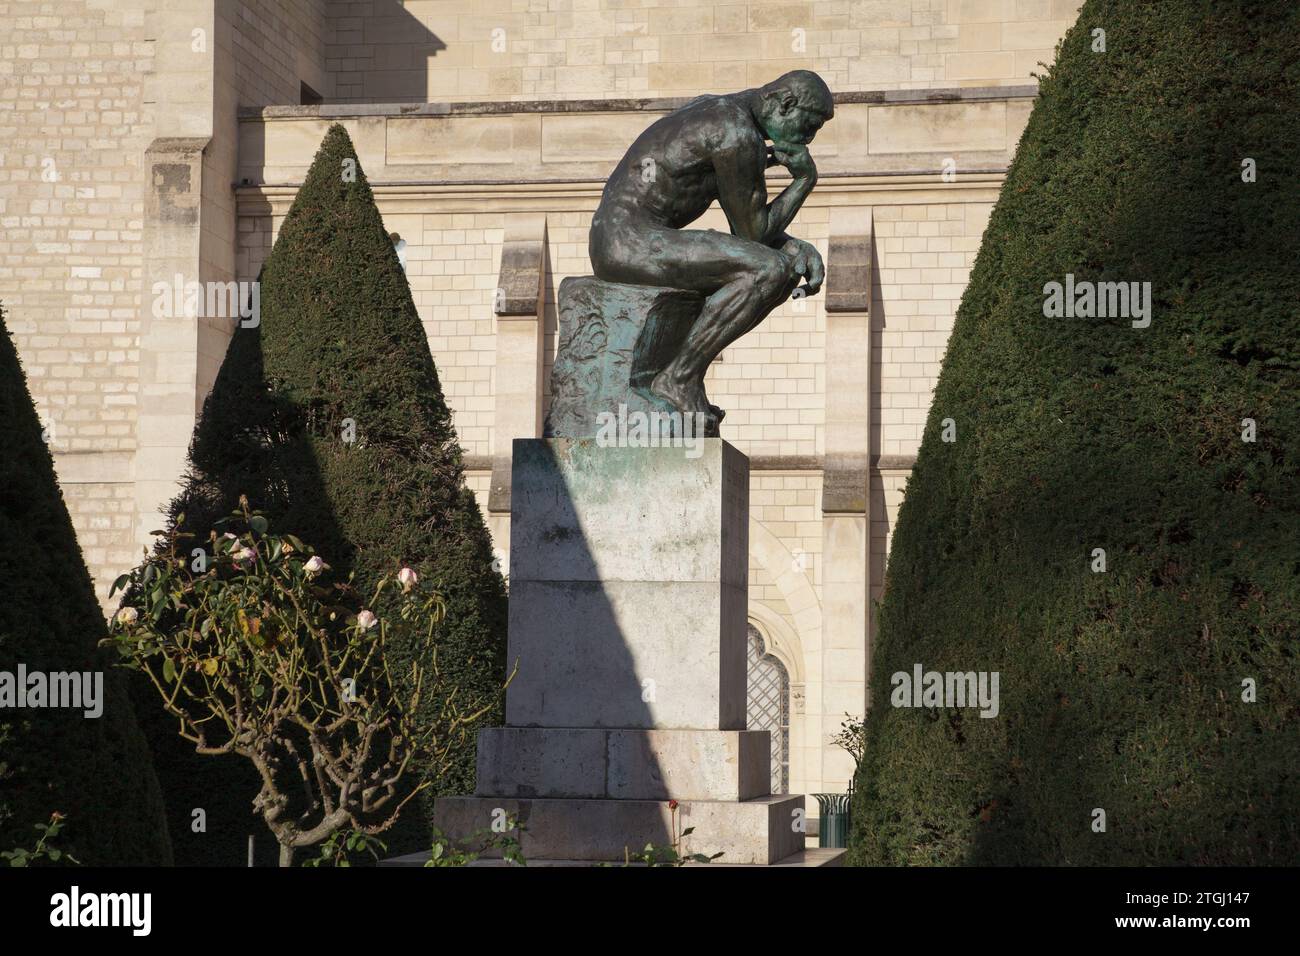 A cast of The Thinker, an iconic sculpture by Rodin in the gardens at Musée Rodin in Paris, France Stock Photo